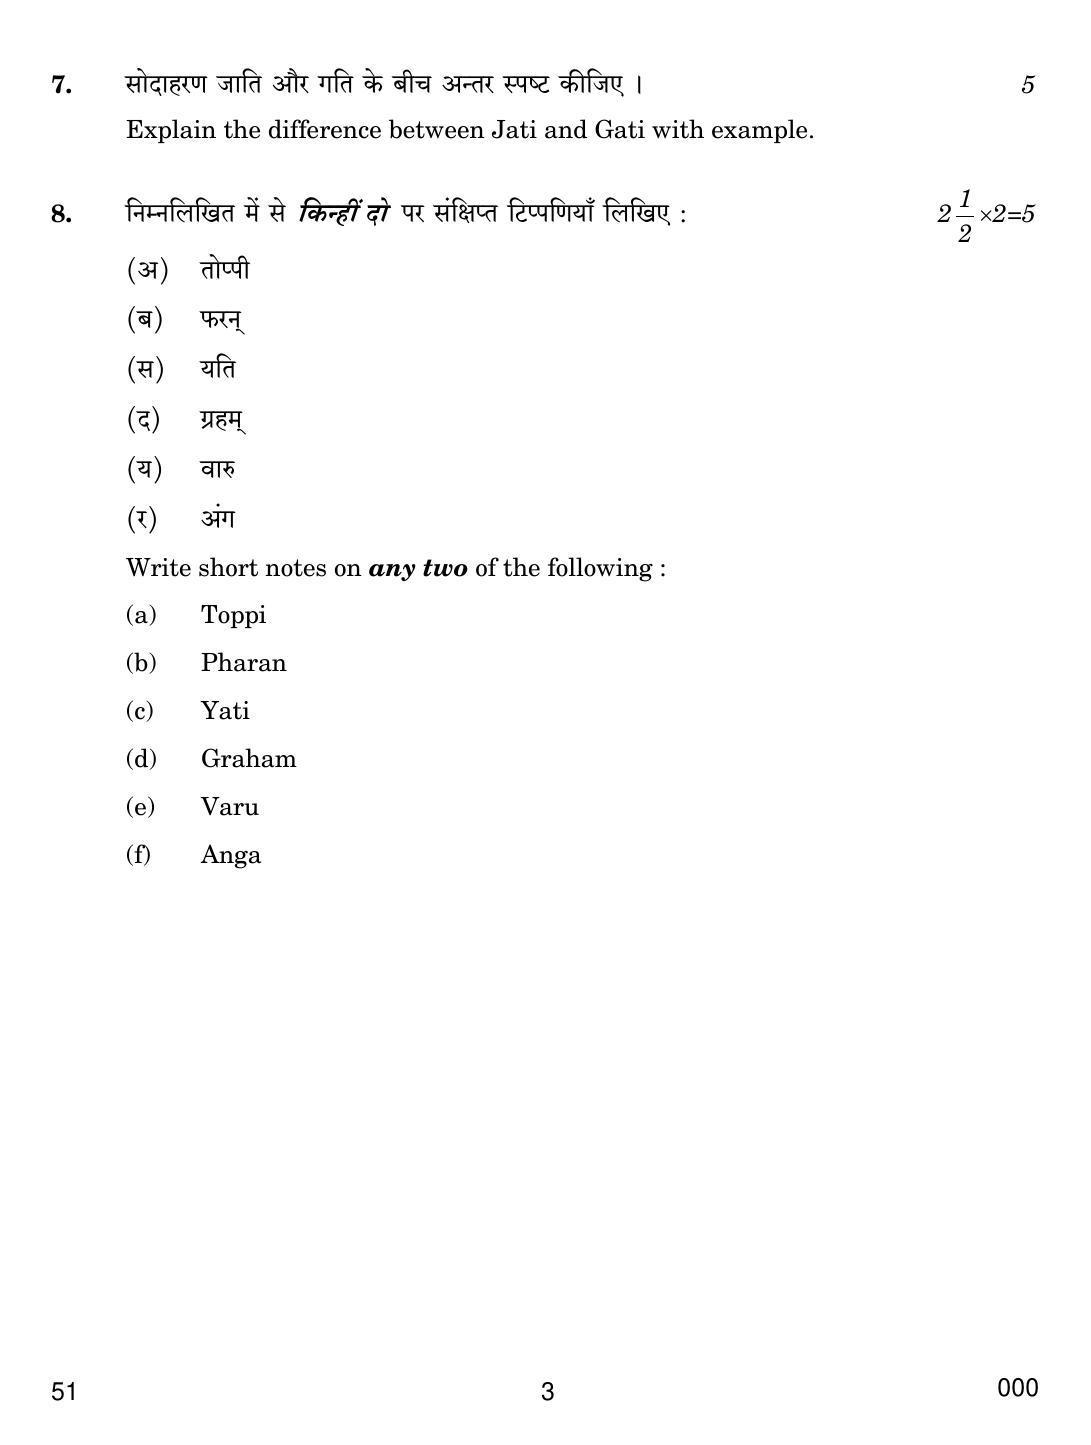 CBSE Class 10 51 CARNATIC MUSIC (Percussion Instruments) 2019 Question Paper - Page 3